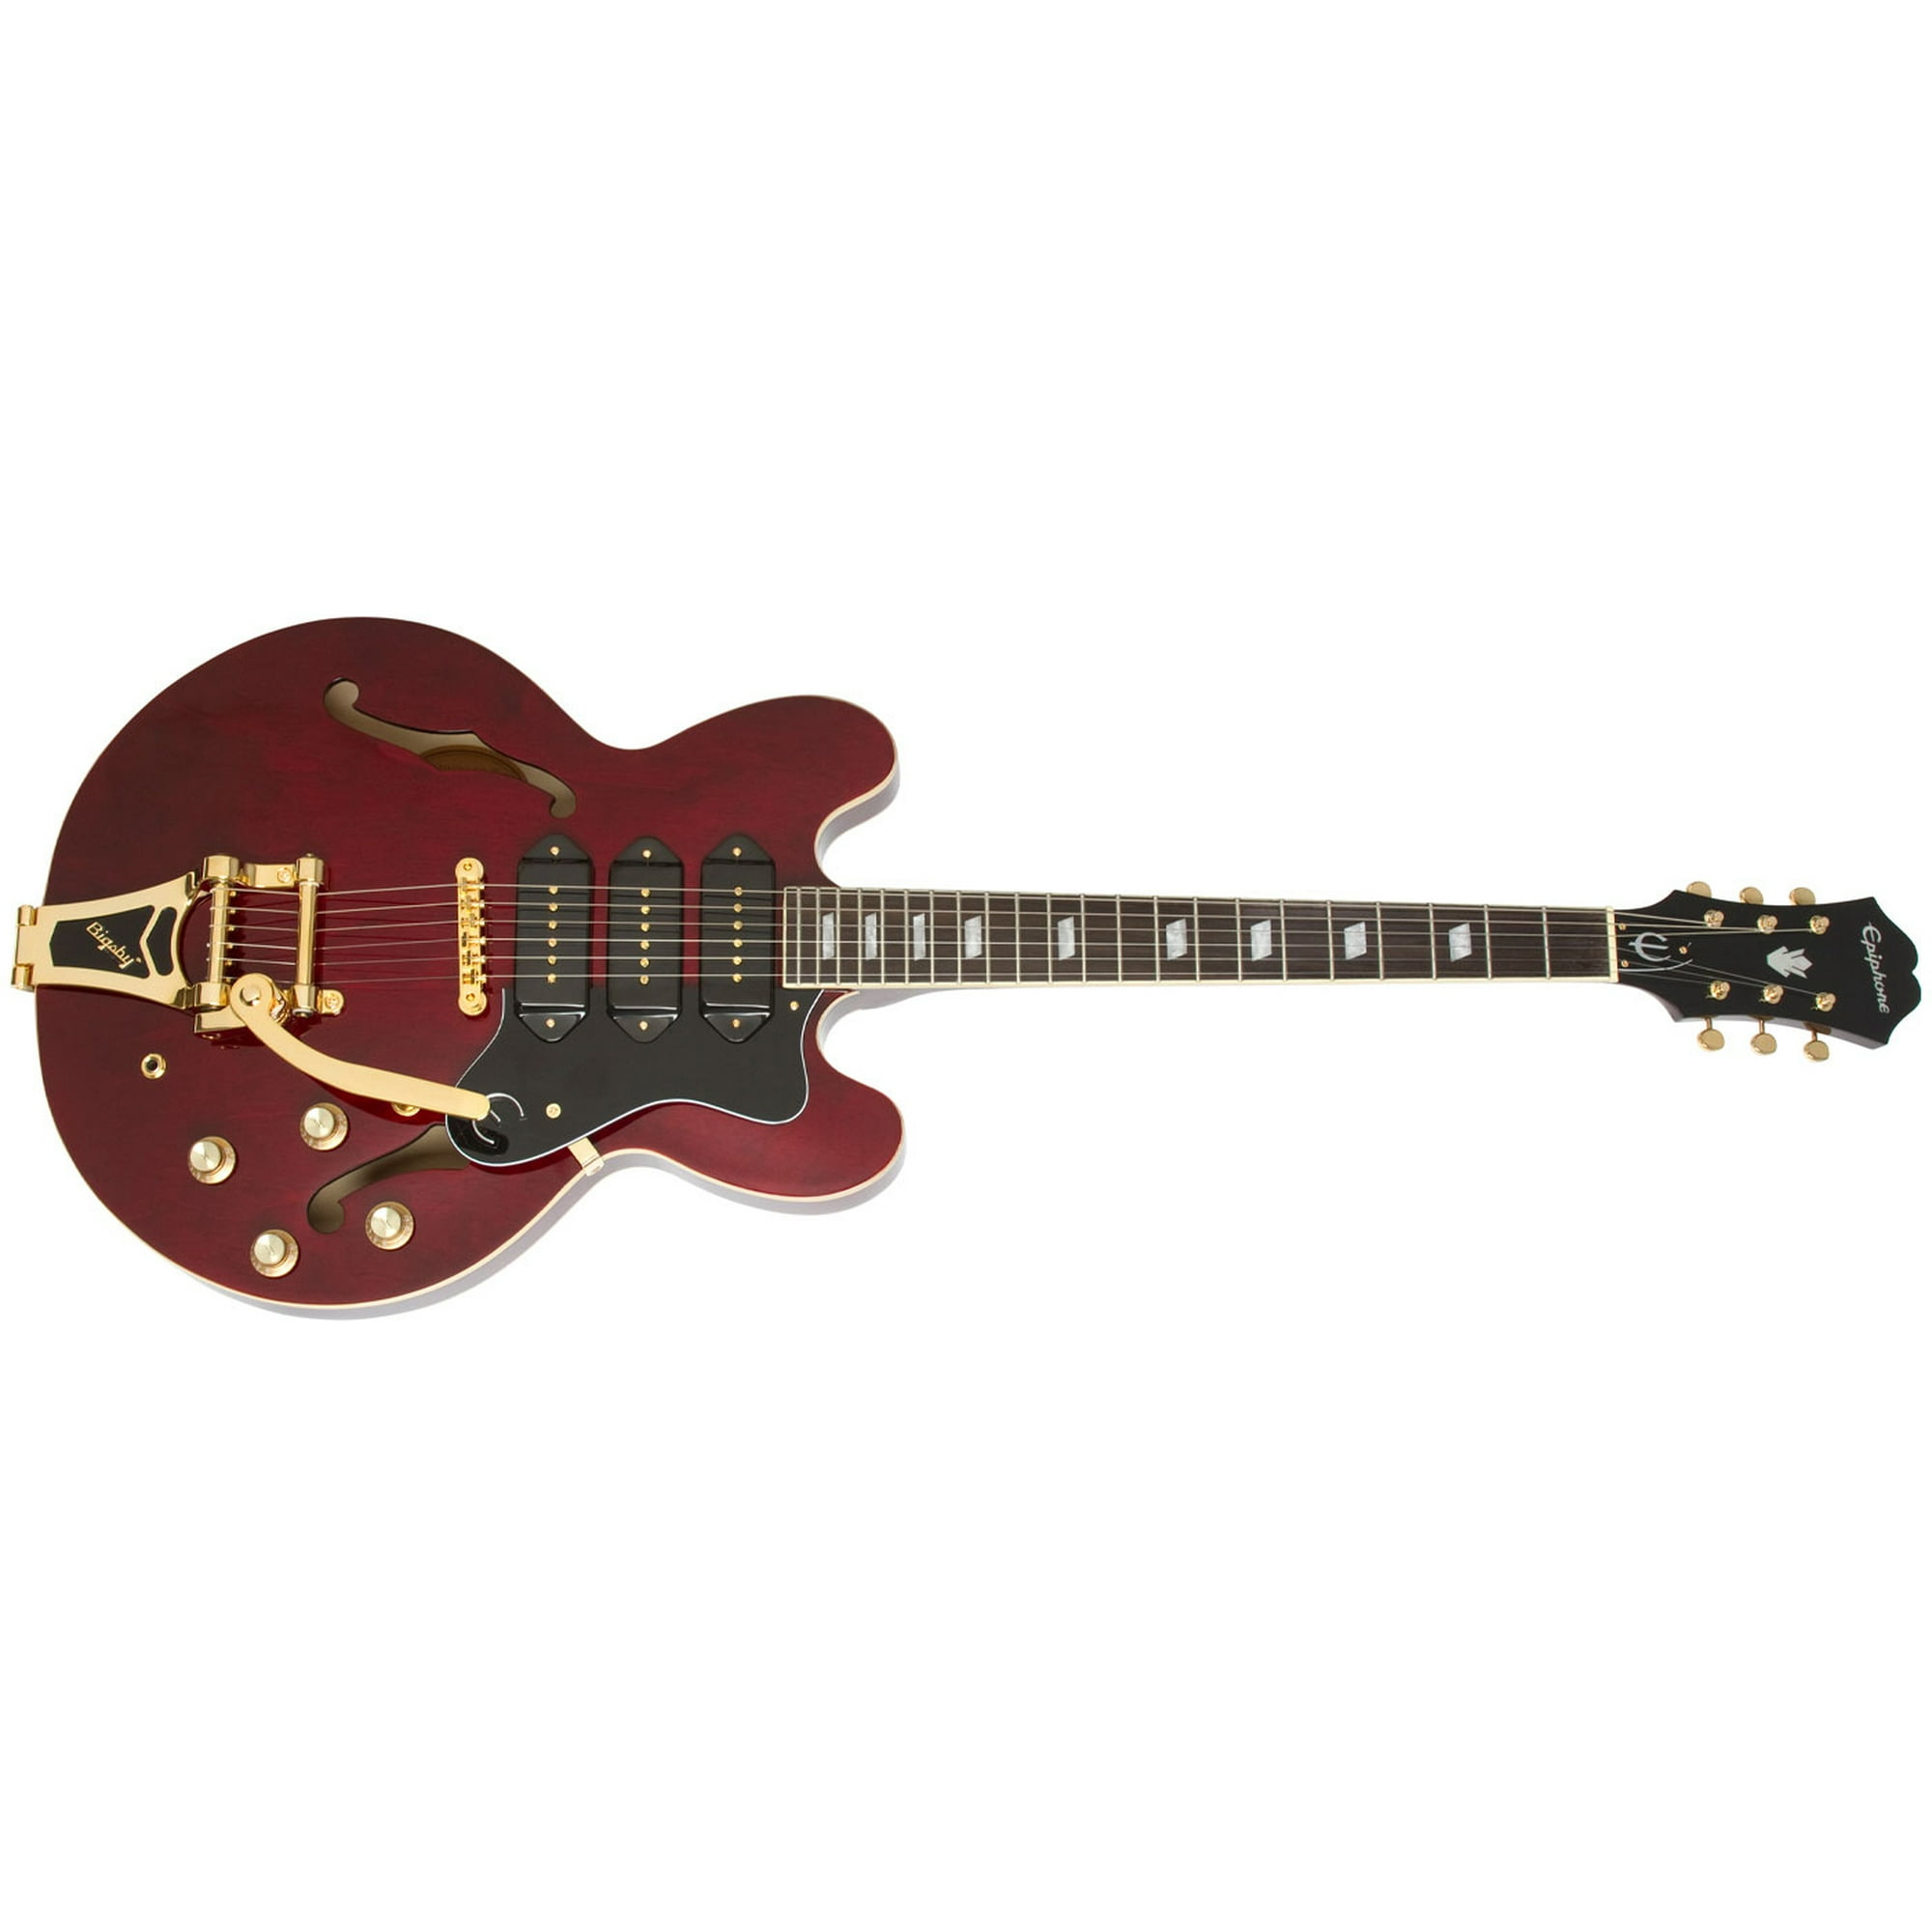 Epiphone Riviera Custom P93 Archtop Electric Guitar - Wine Red